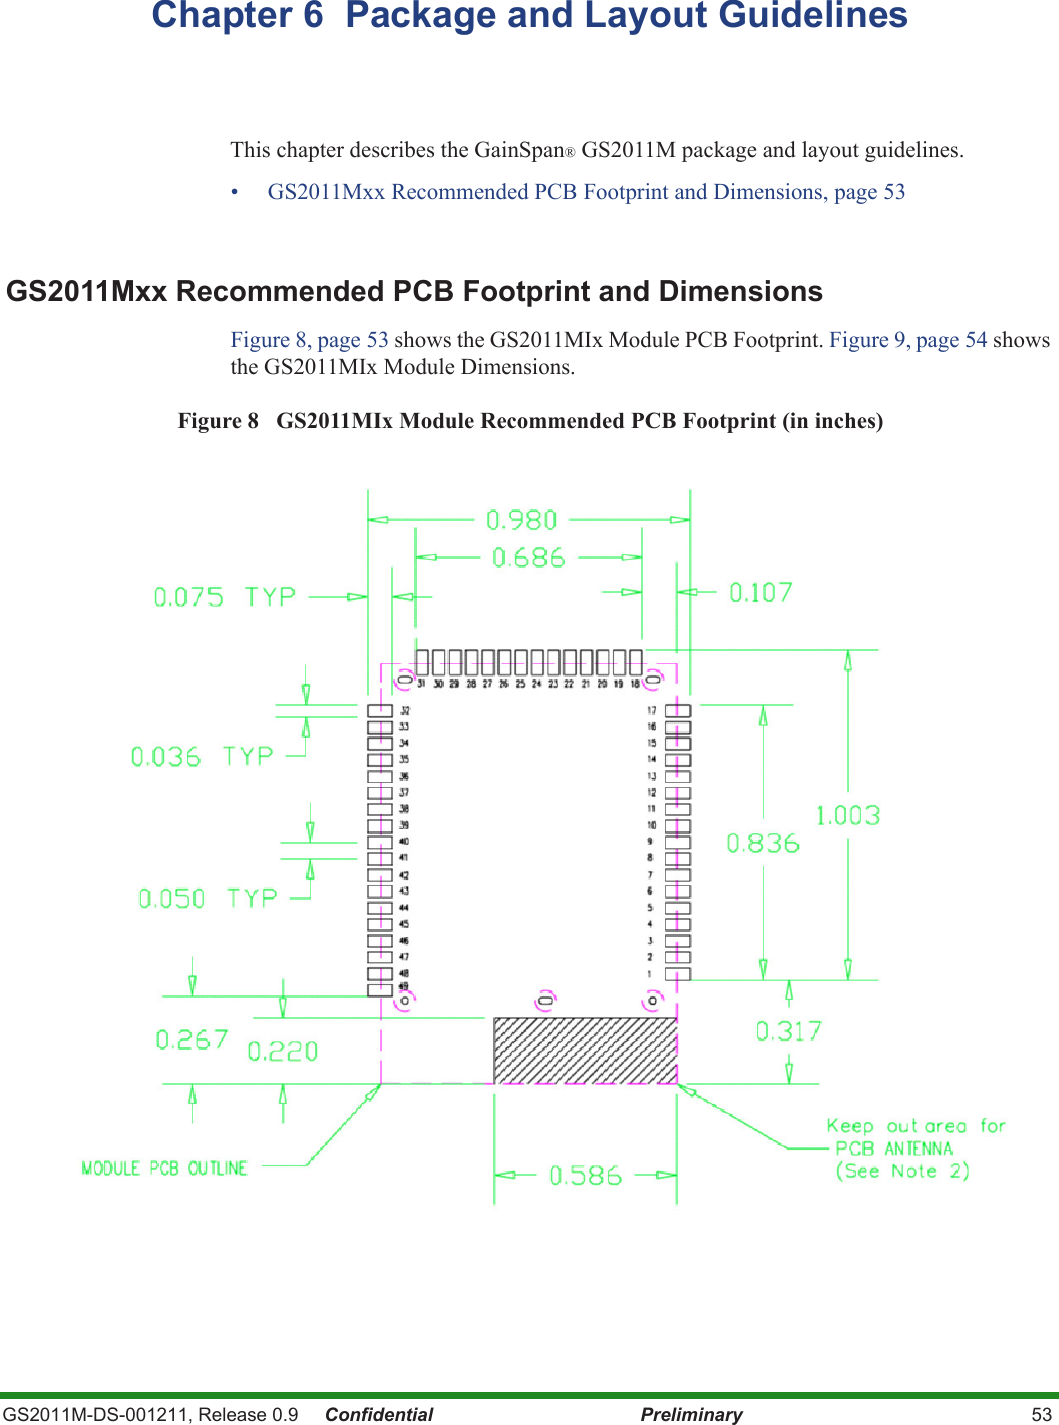 GS2011M-DS-001211, Release 0.9     Confidential Preliminary 53Chapter 6  Package and Layout GuidelinesThis chapter describes the GainSpan® GS2011M package and layout guidelines.• GS2011Mxx Recommended PCB Footprint and Dimensions, page 53GS2011Mxx Recommended PCB Footprint and DimensionsFigure 8, page 53 shows the GS2011MIx Module PCB Footprint. Figure 9, page 54 shows the GS2011MIx Module Dimensions.Figure 8   GS2011MIx Module Recommended PCB Footprint (in inches)